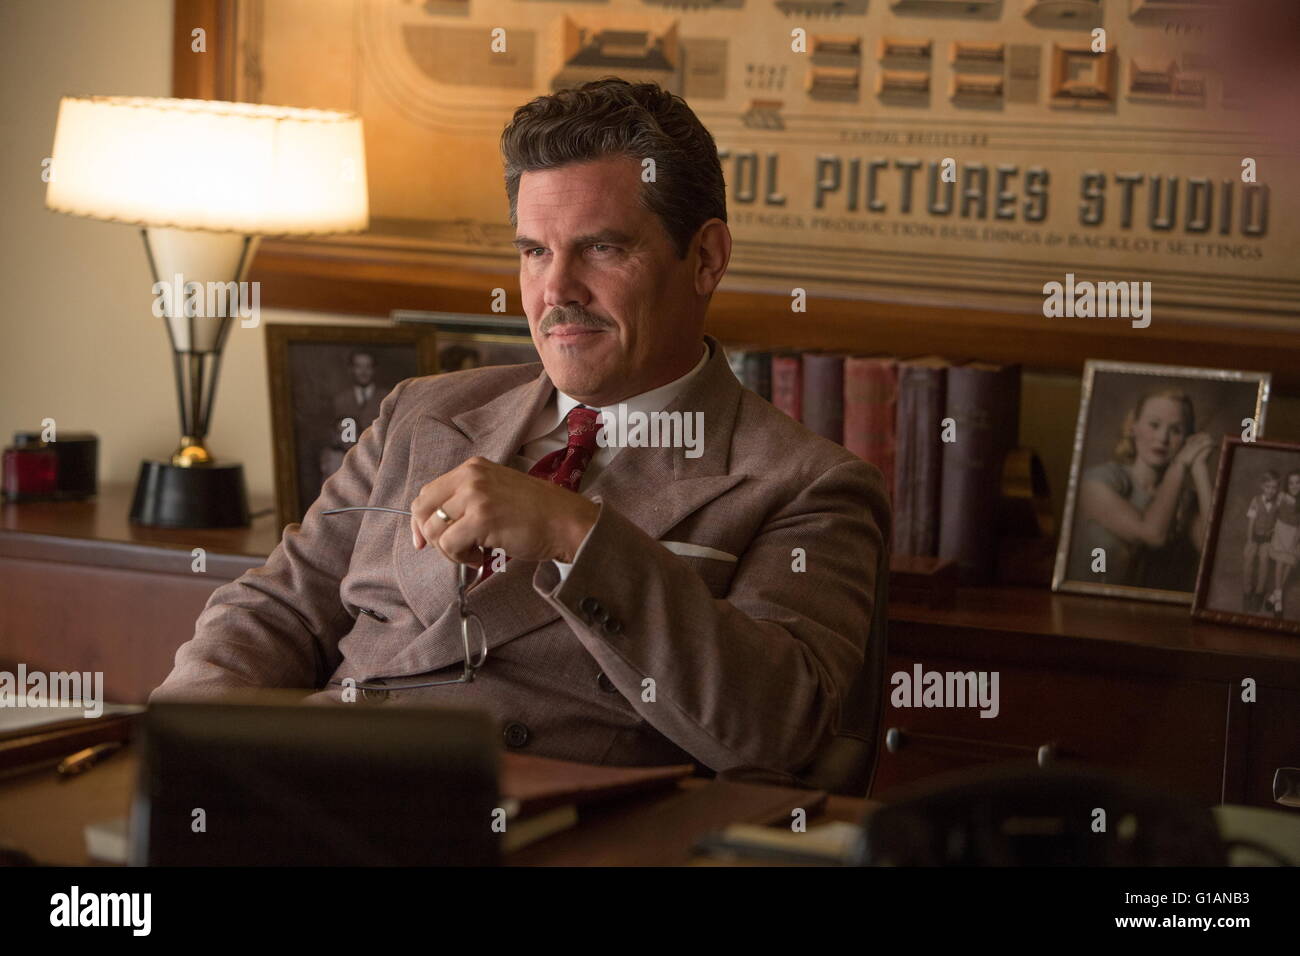 RELEASE DATE: February 5, 2016 TITLE: Hail, Caesar! STUDIO: Universal Pictures DIRECTOR: Ethan Coen, Joel Coen PLOT: A Hollywood fixer in the 1950s works to keep the studio's stars in line PICTURED: Josh Brolin (Credit: c Universal Pictures/Entertainment Pictures/) Stock Photo